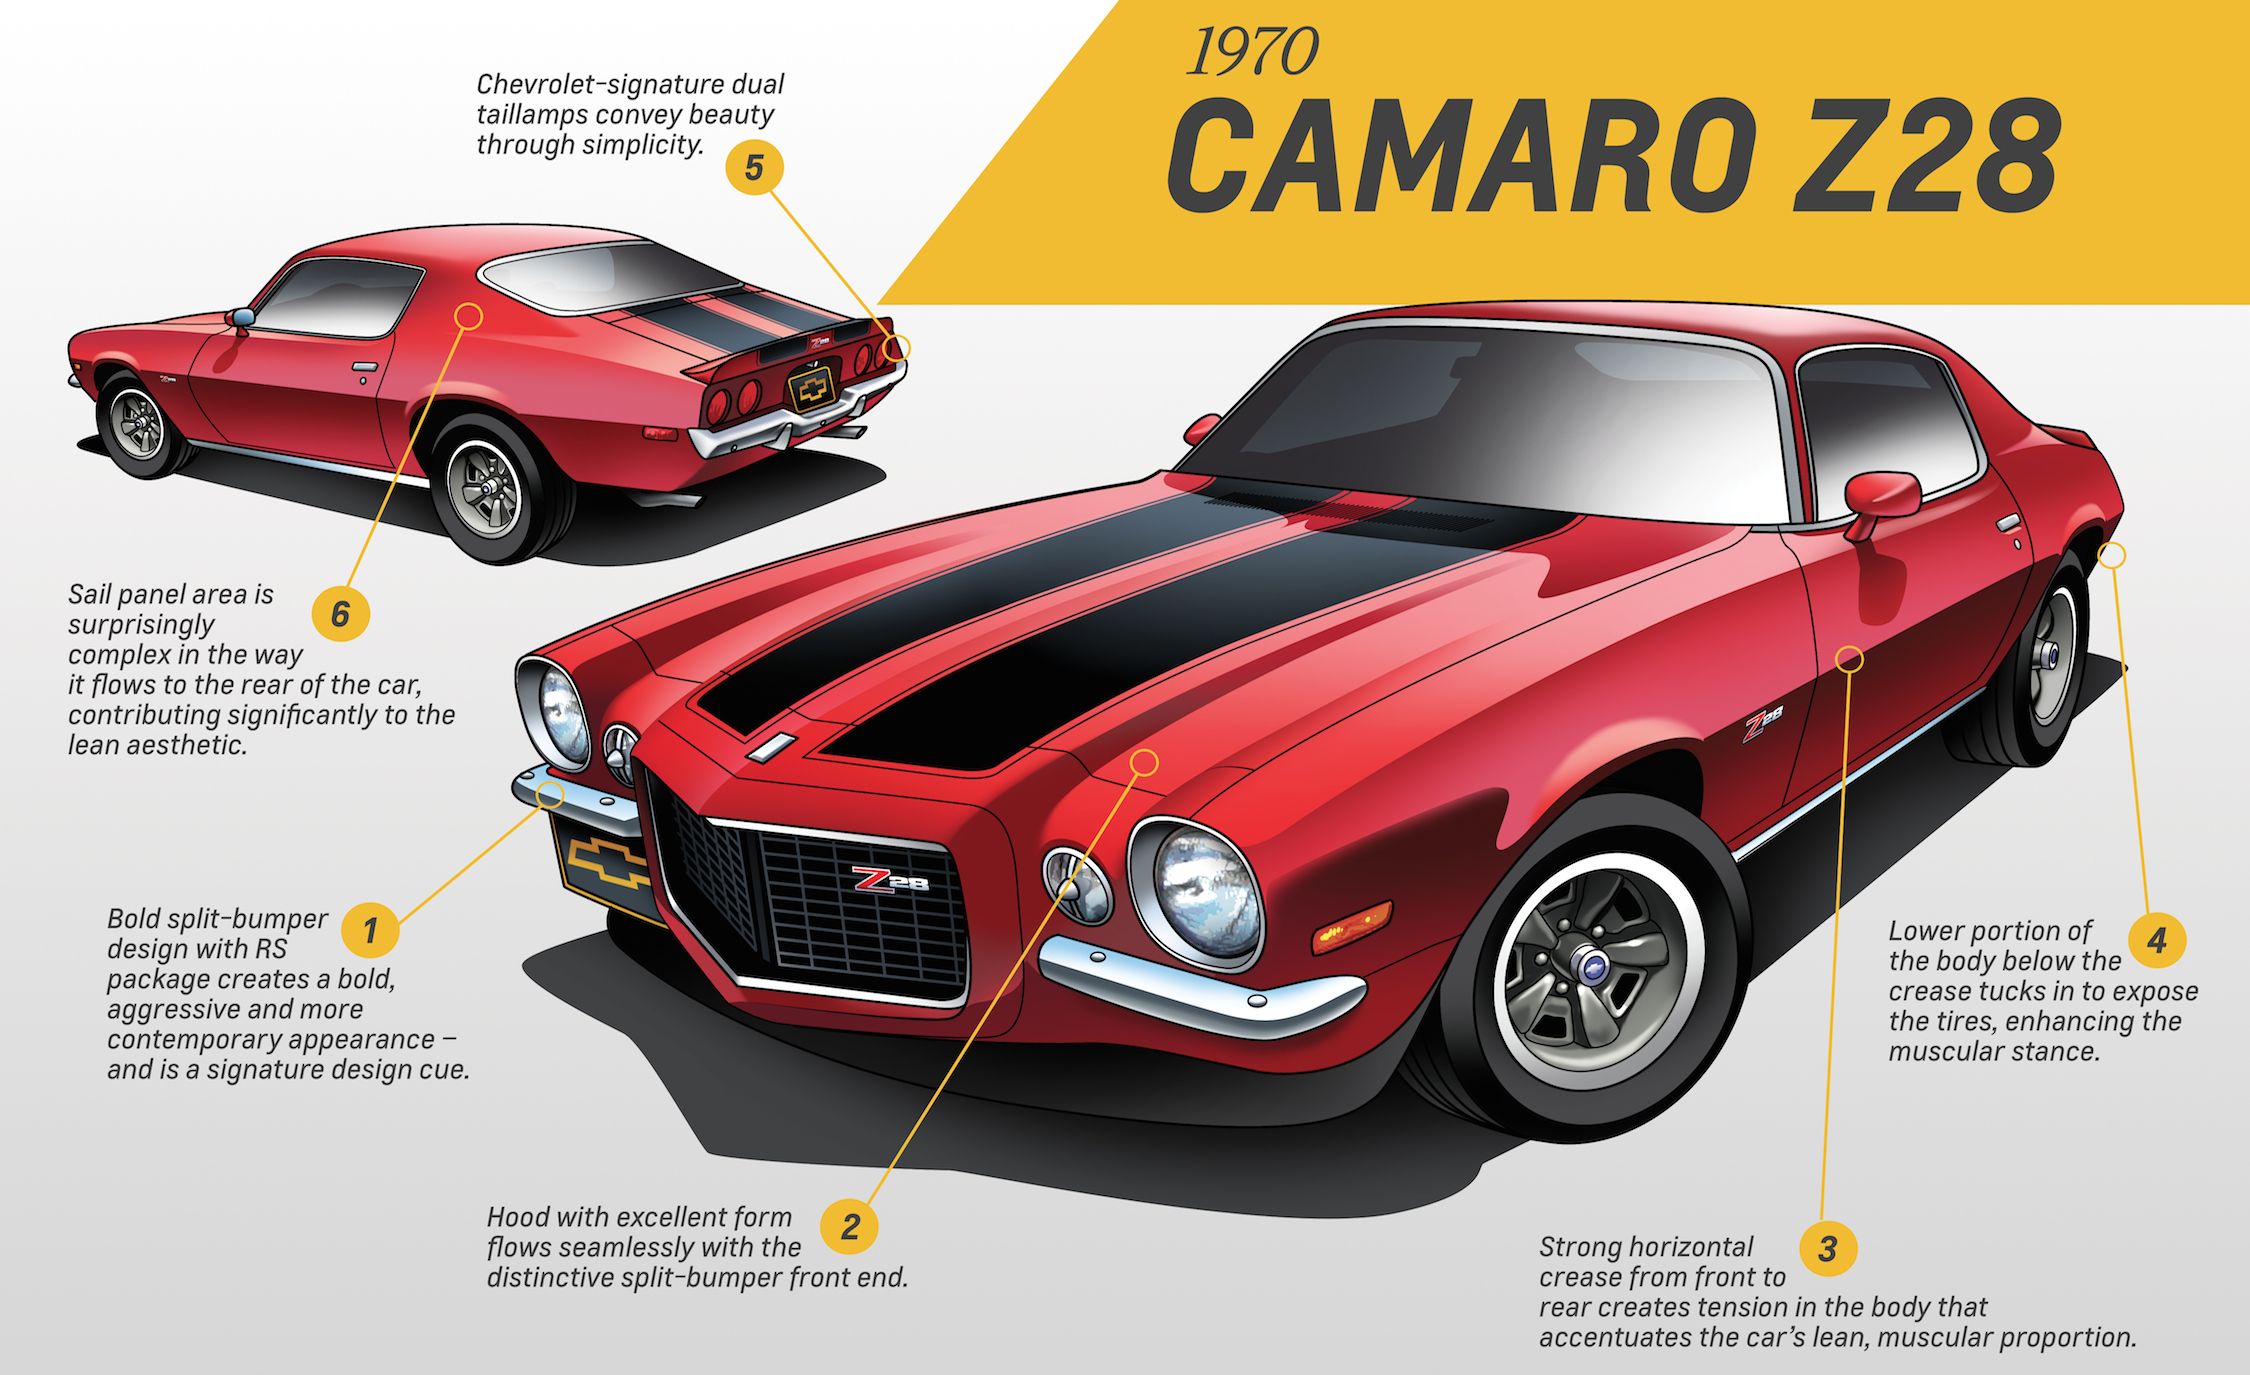 Five GM Designers Weigh In on Five Generations of Camaro Design